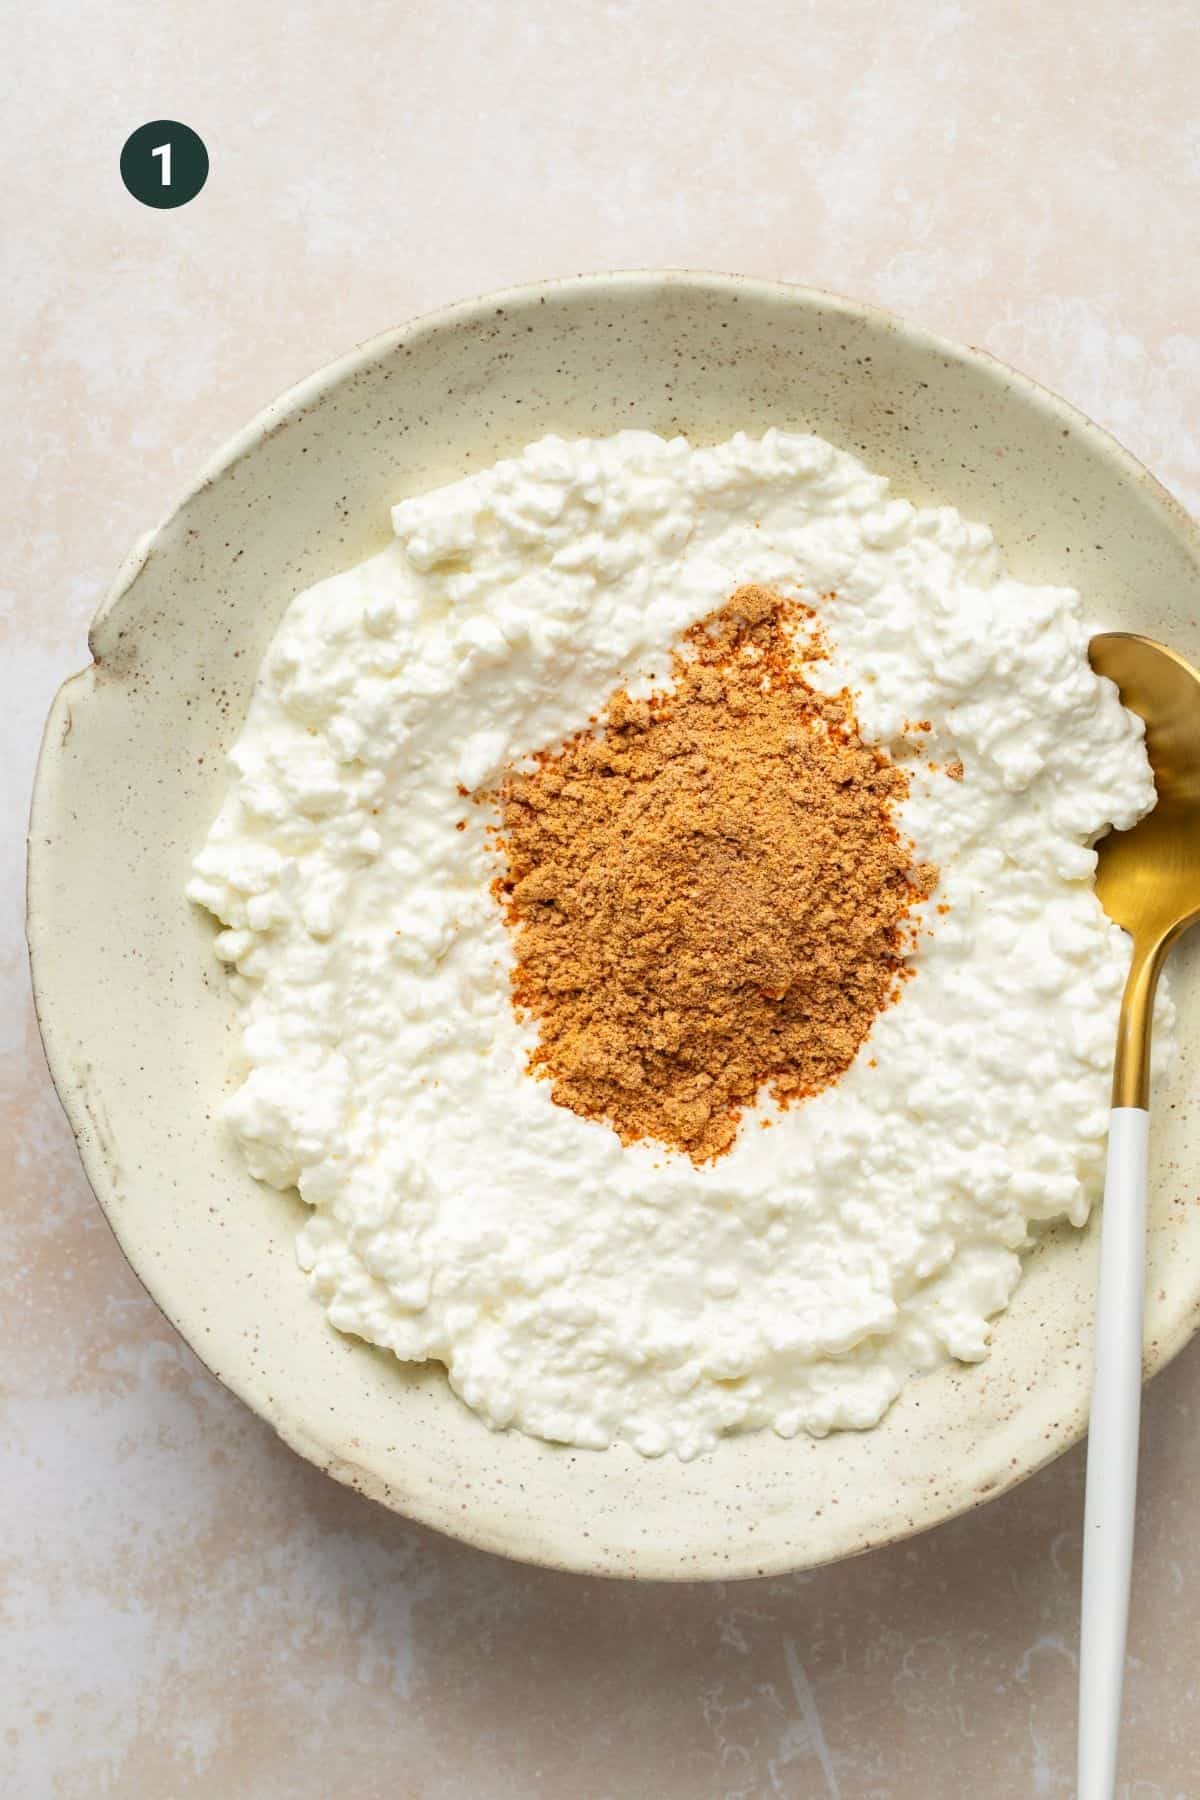 Cottage cheese and taco seasoning in a bowl with a spoon to mix.